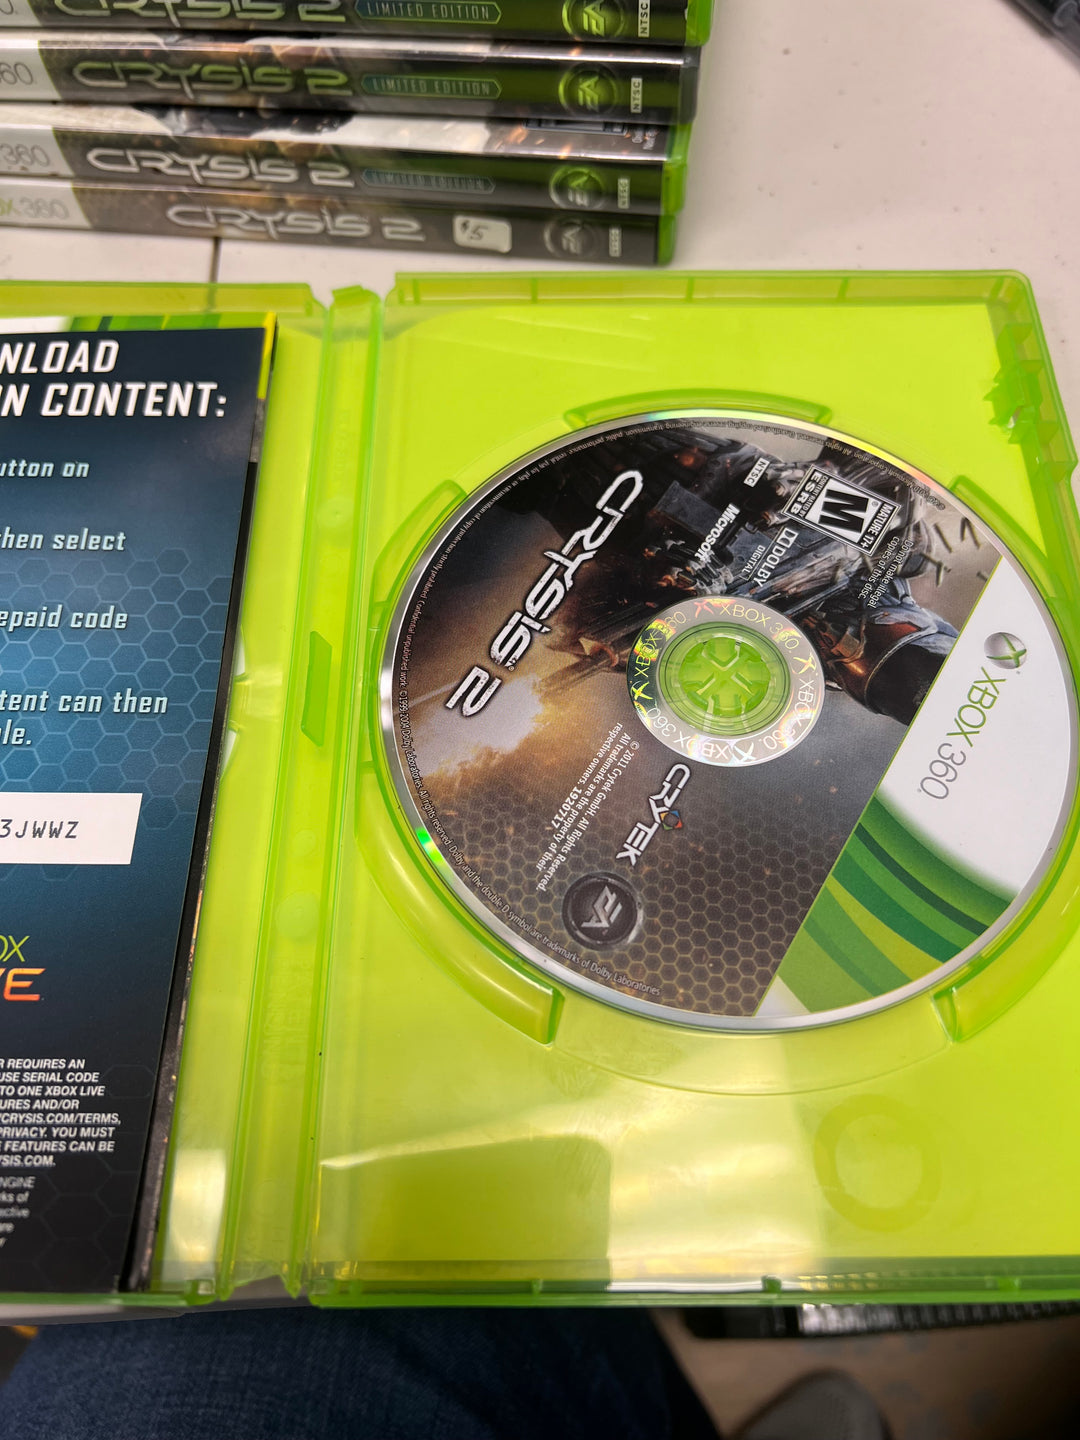 Crysis 2 Limited Edition for Microsoft Xbox 360 in case. Tested and Working.     DO61124